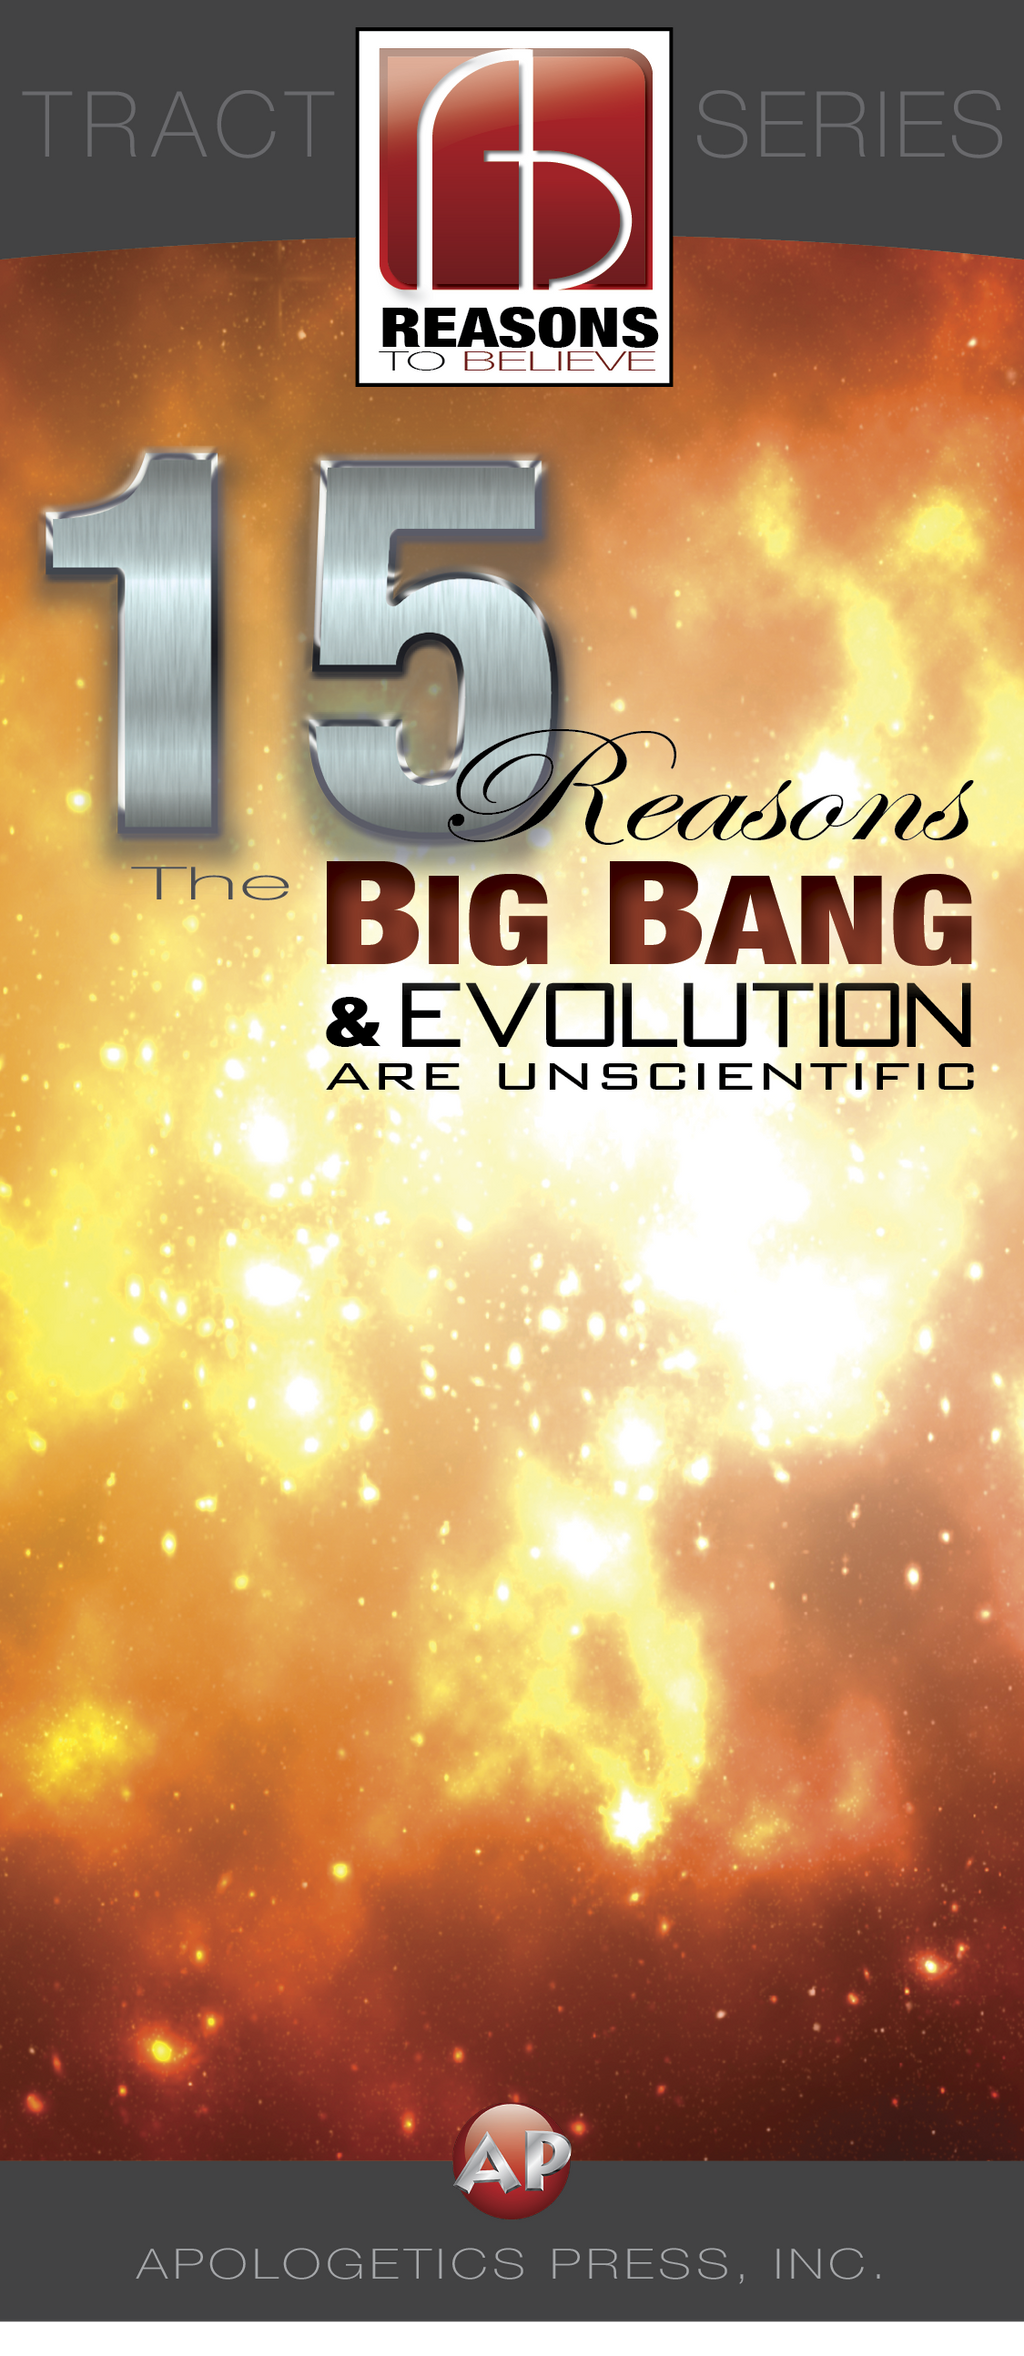 15 Reasons the Big Bang and Evolution are Unscientific